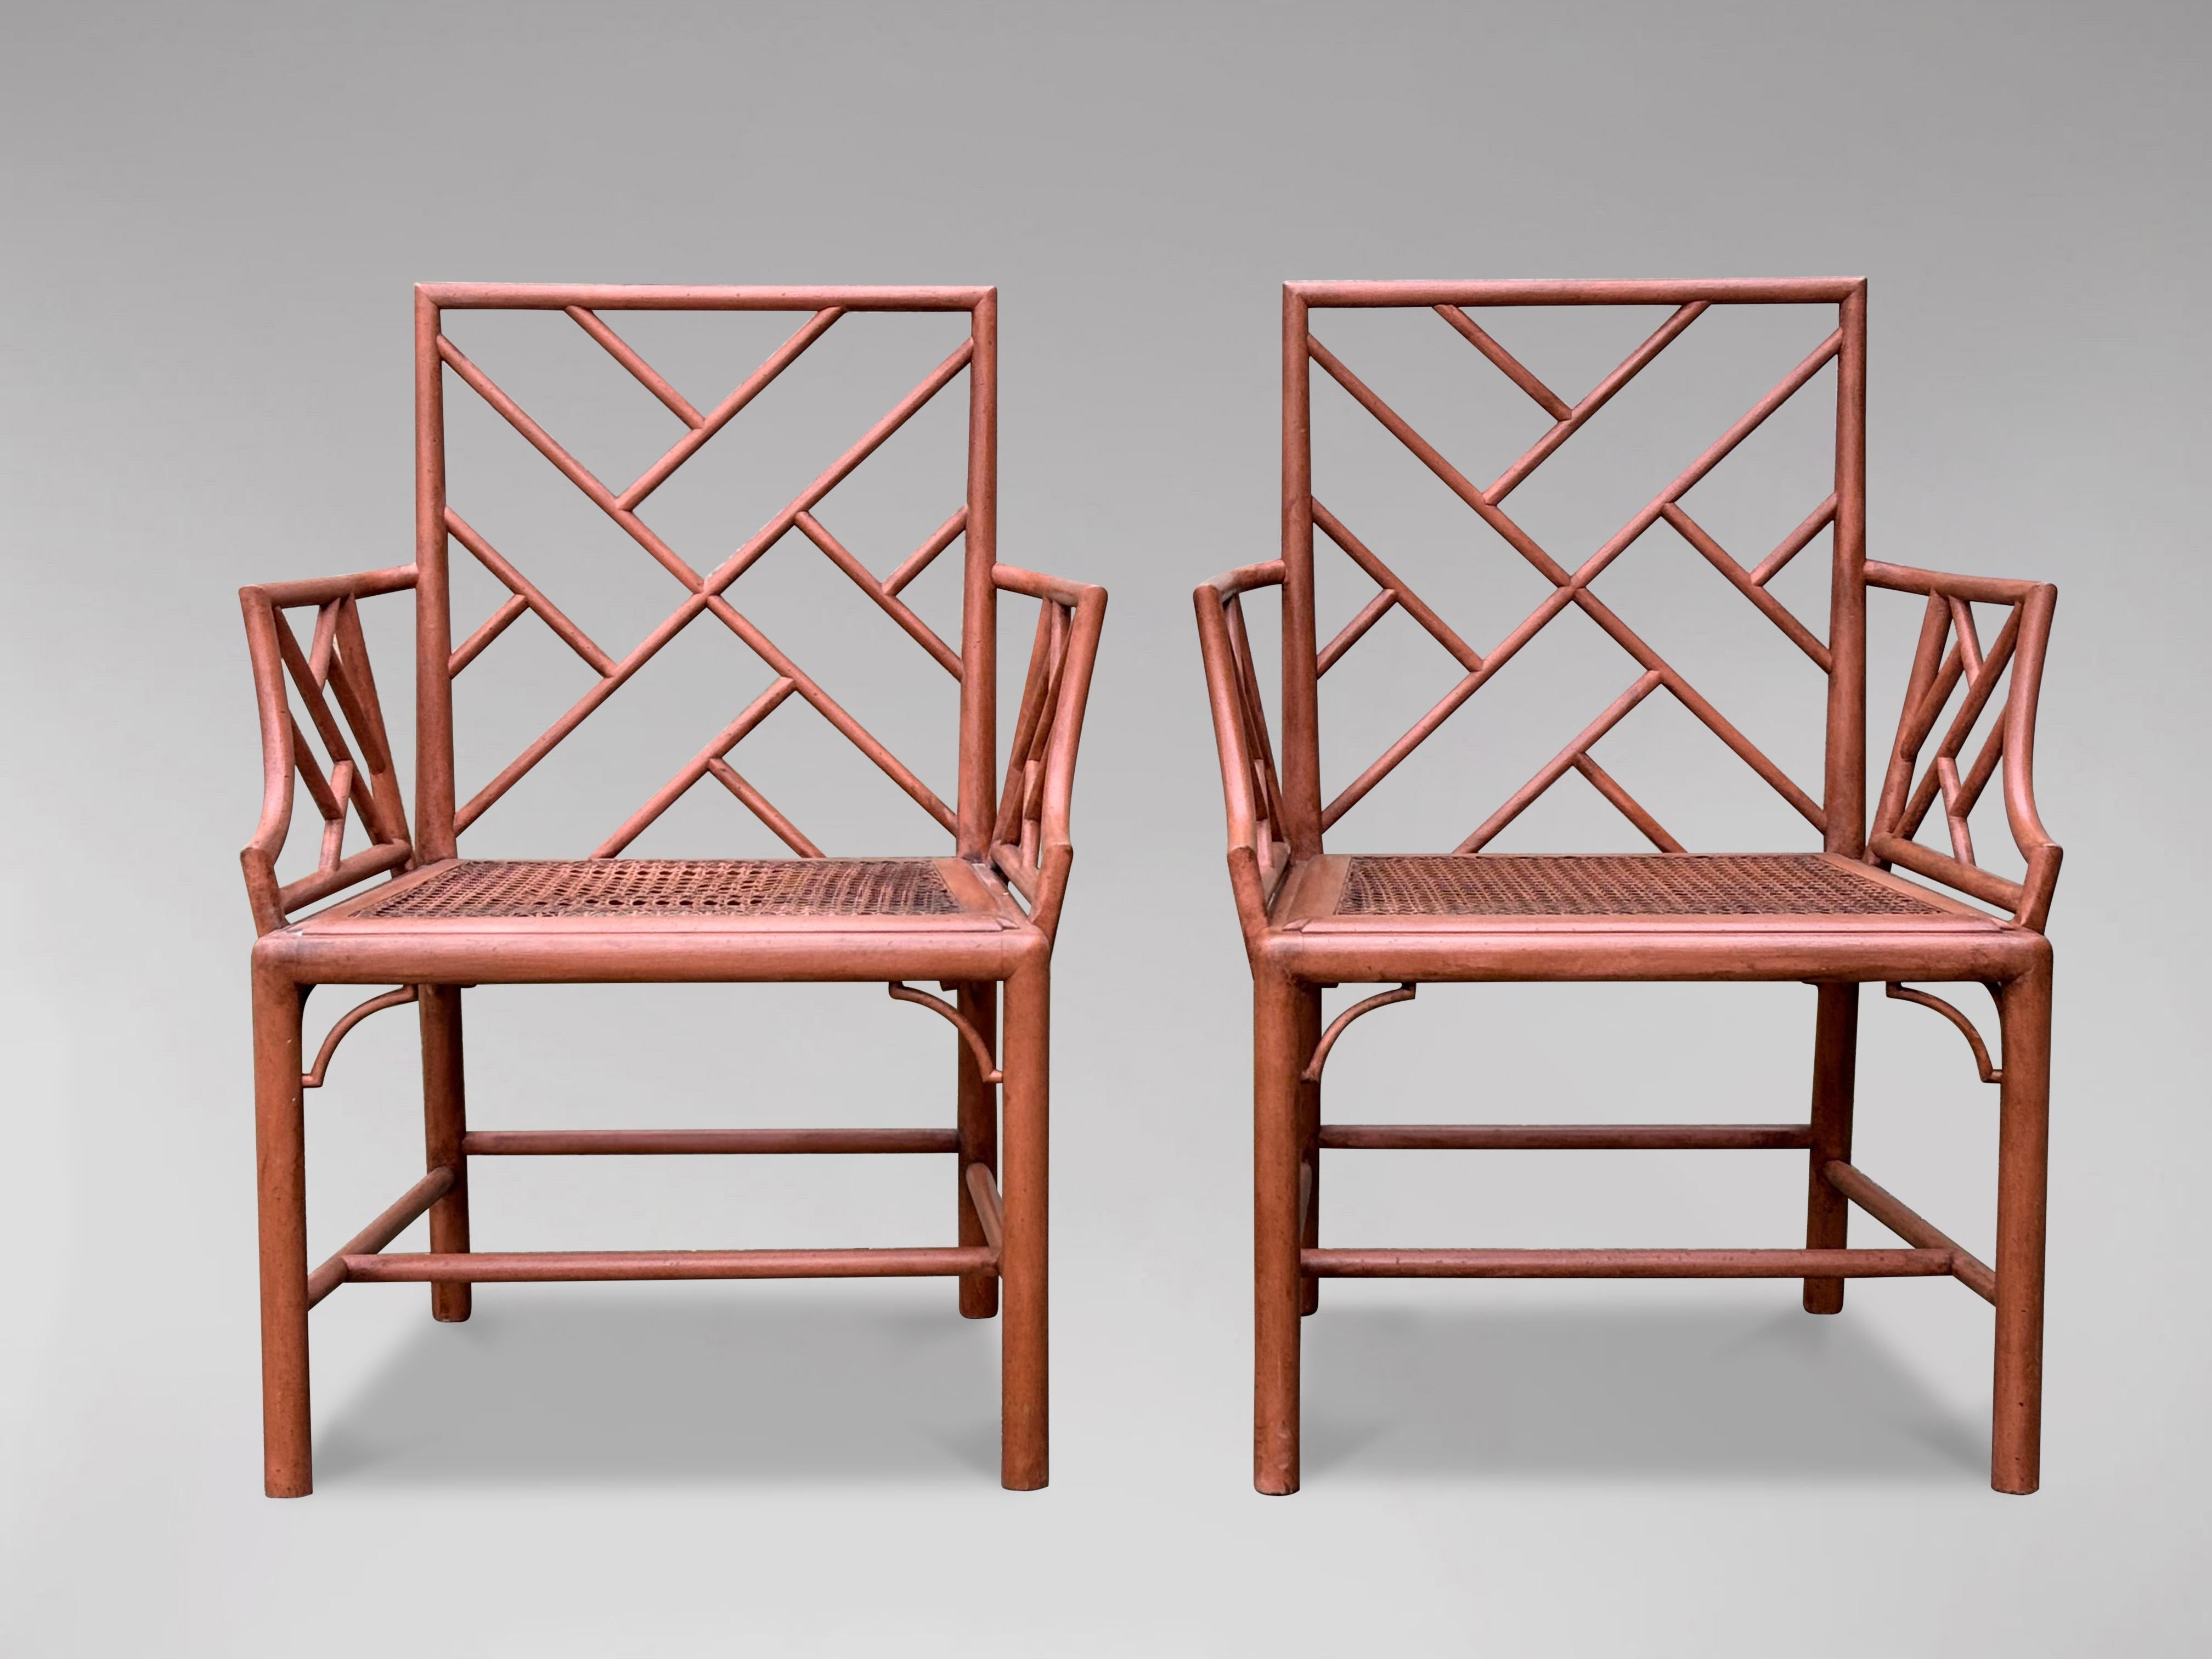 A pair of superb mid century Chippendale style faux bamboo armchairs in a wonderful patinated sanguine colour. The chairs are in overall good condition and include a separate blue velvet seat cushion over the caned seats. The frames have a carved